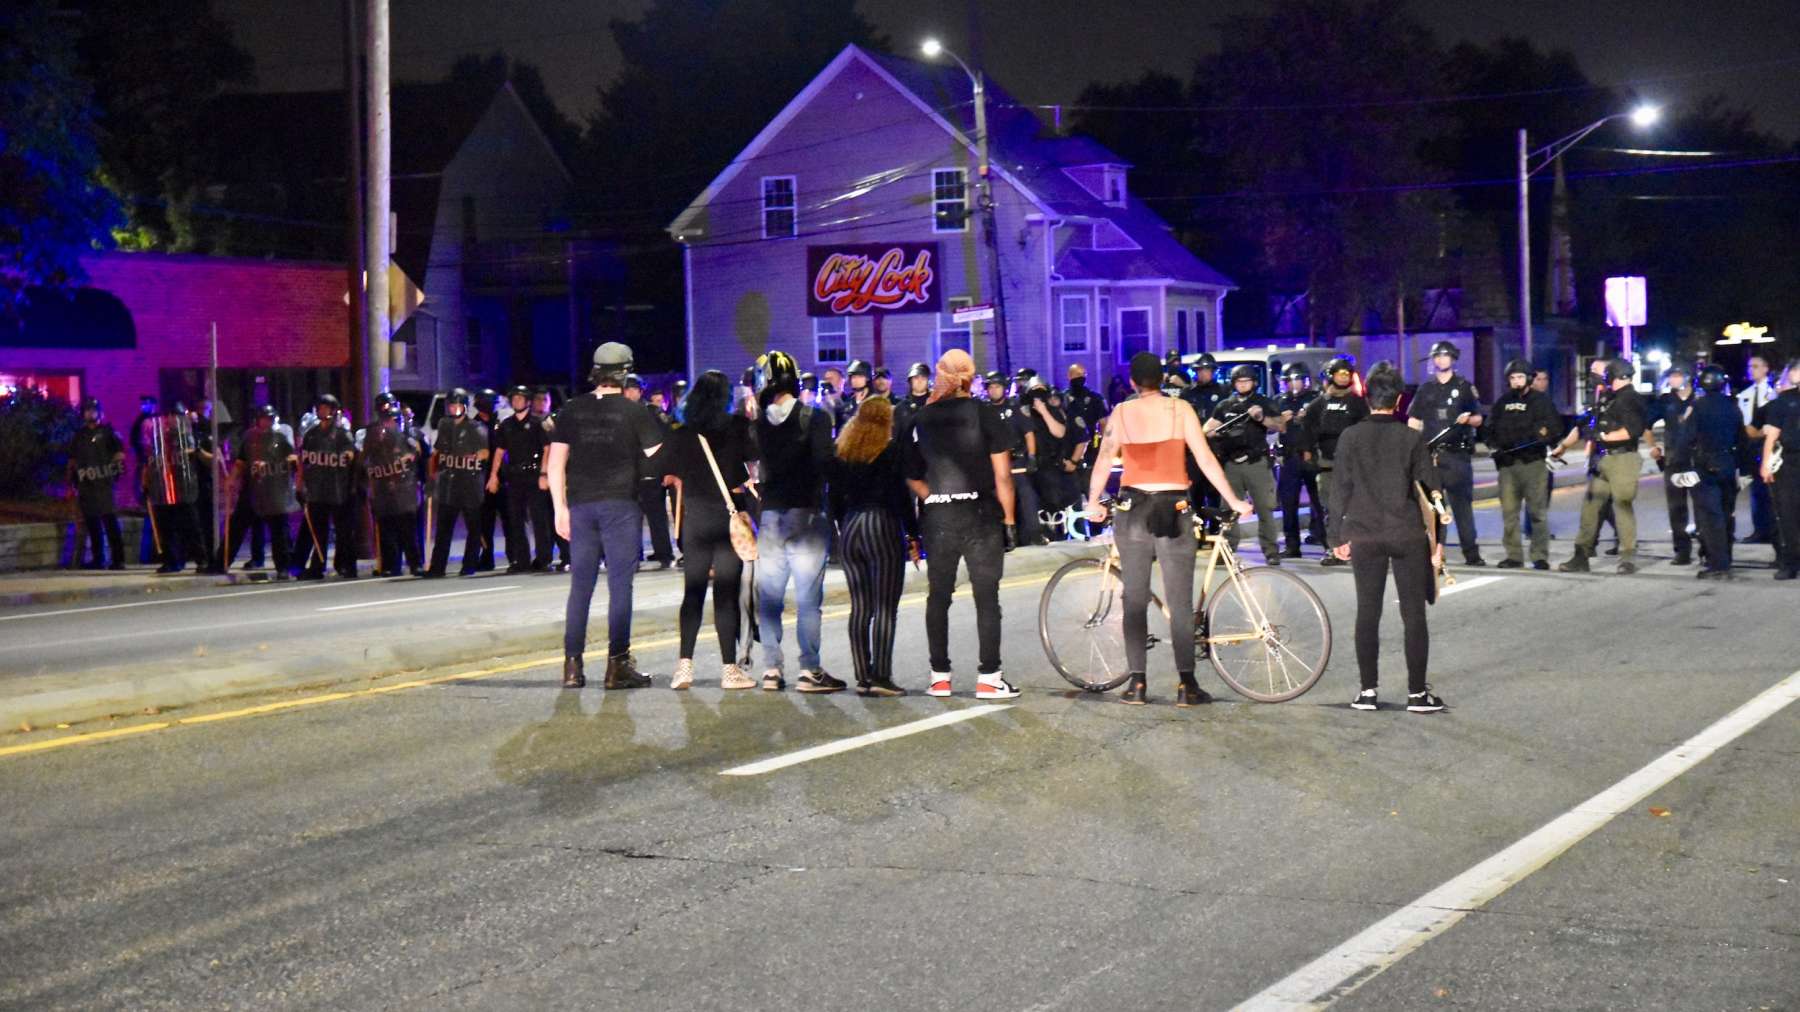 Rhode Island News: Police clash with protesters at PVD/Cranston border